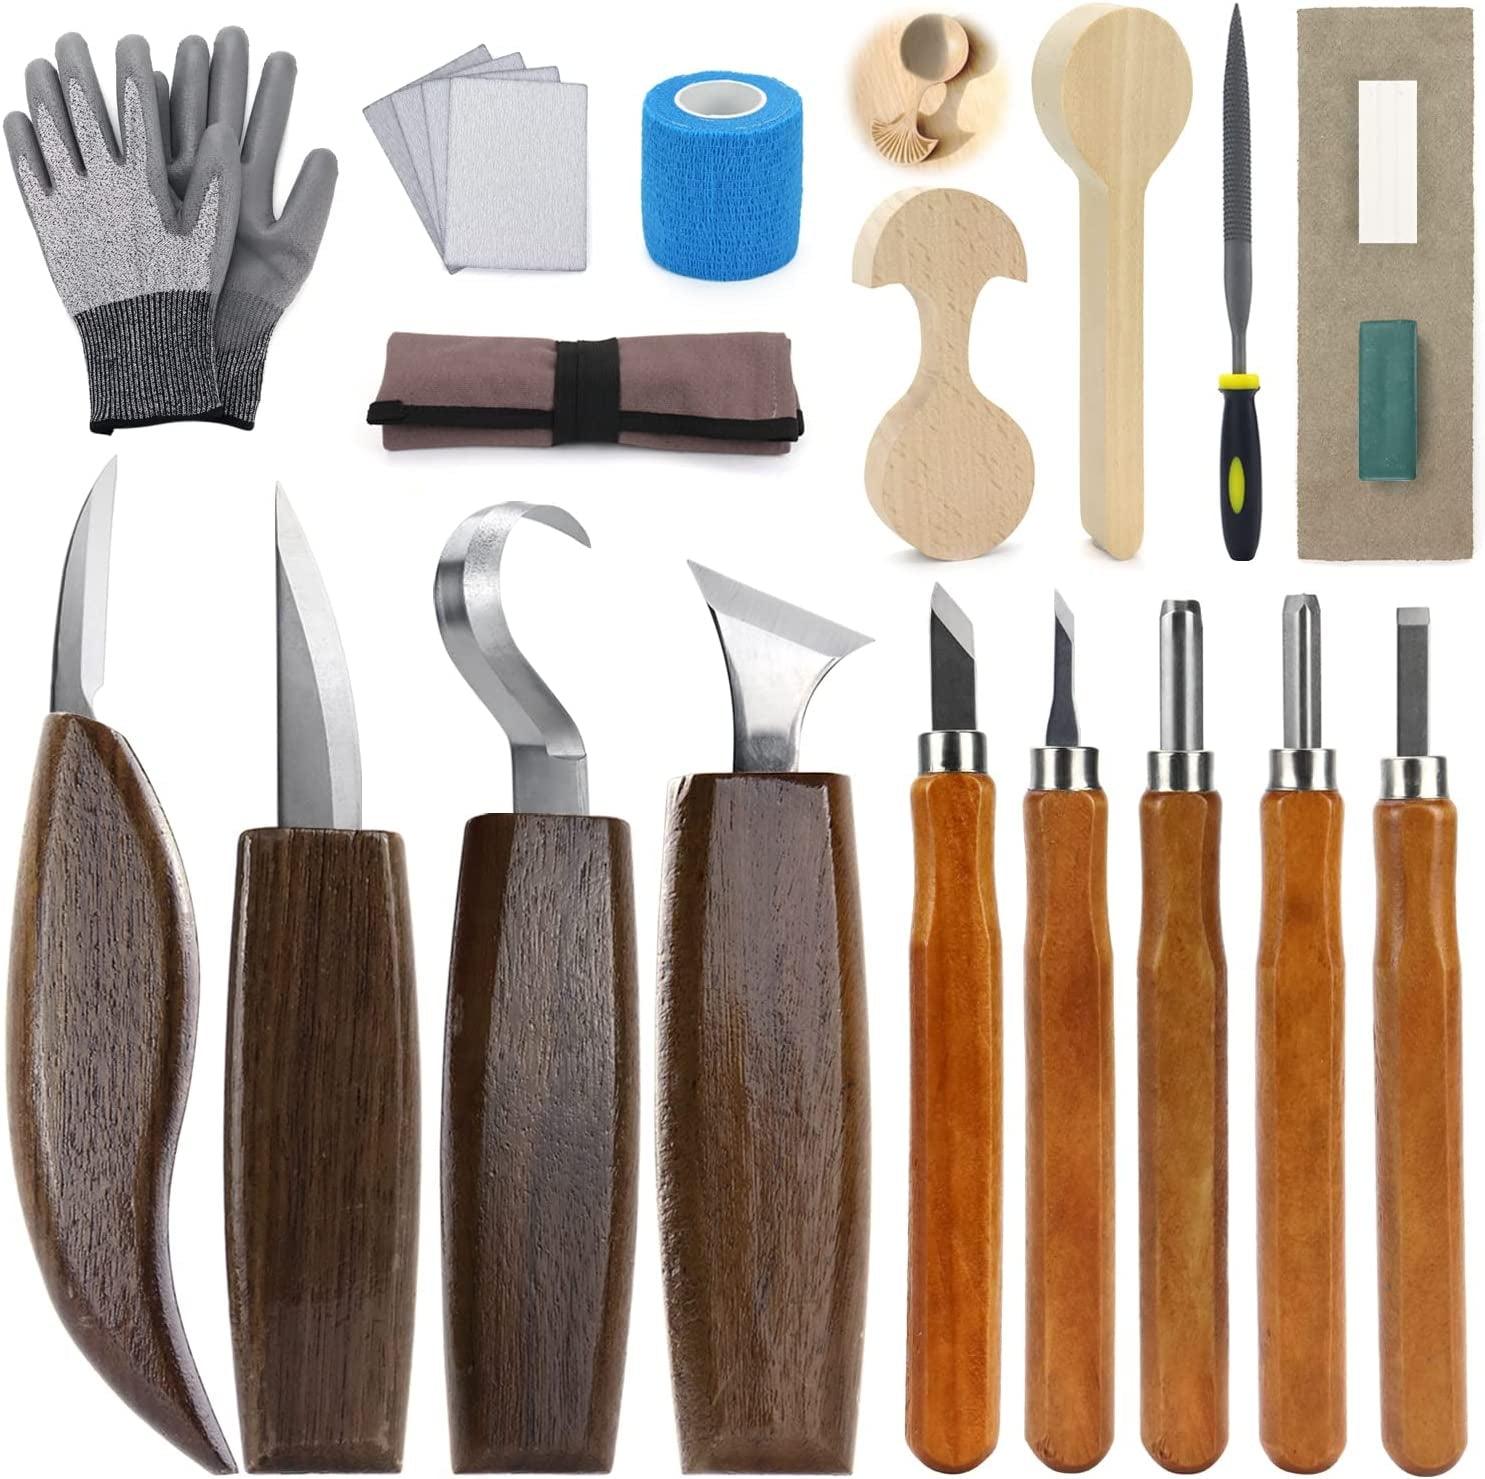 Wood Carving Kit 22PCS Wood Carving Tools Hand Knife Set with Anti-Slip  Cut-Resistant Gloves, Needle File Wood Spoon – WoodArtSupply